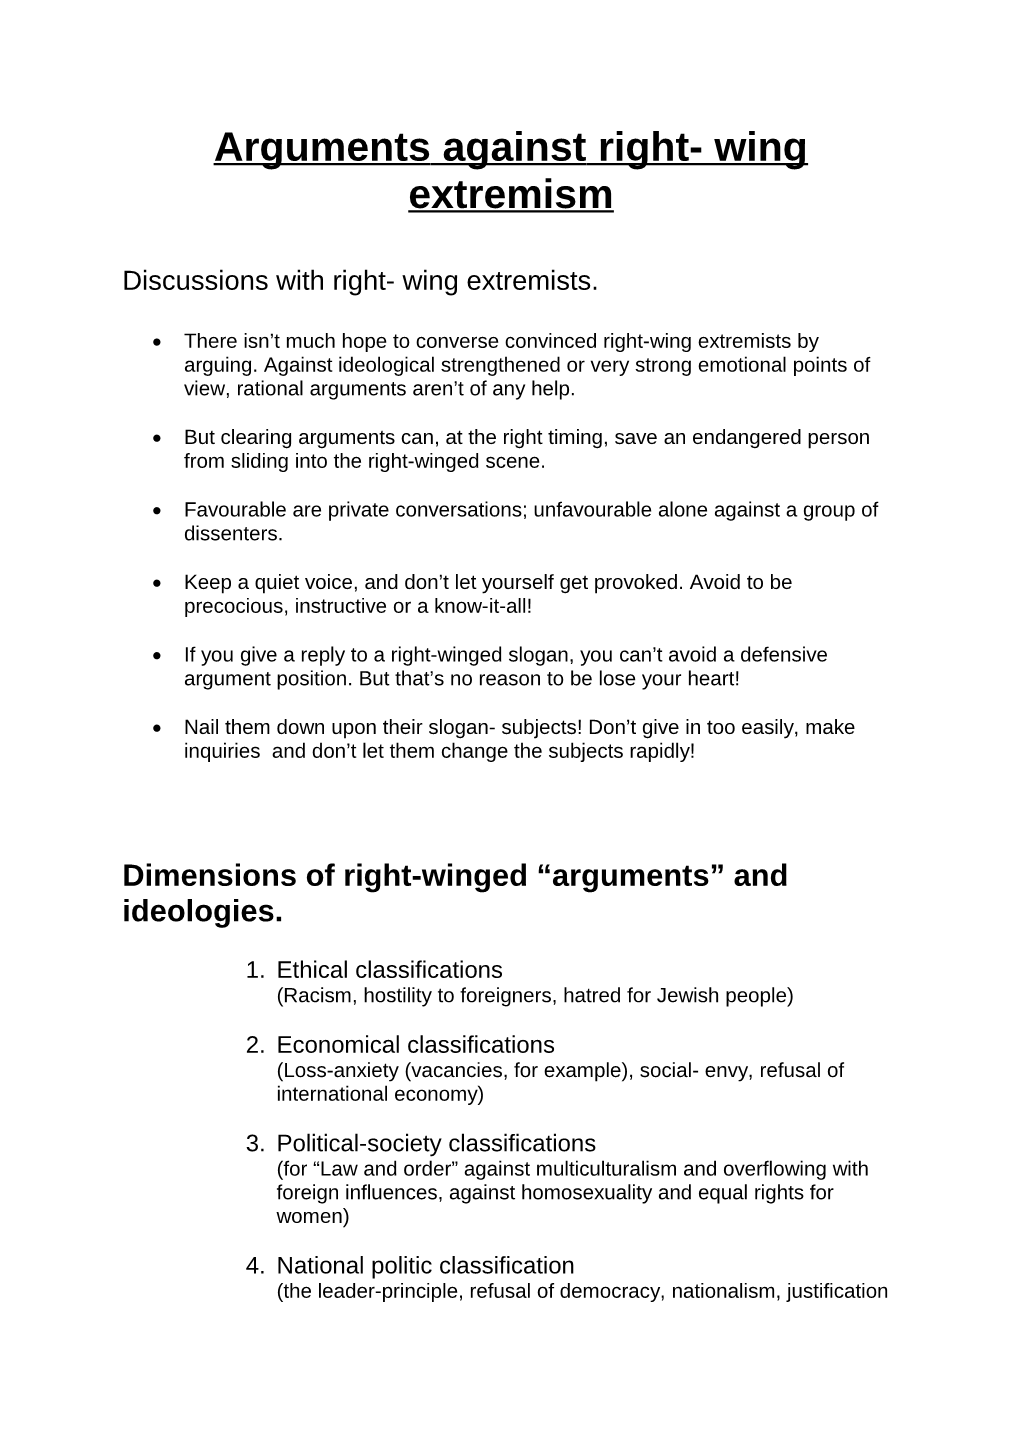 Arguments Against Right- Wing Extremism